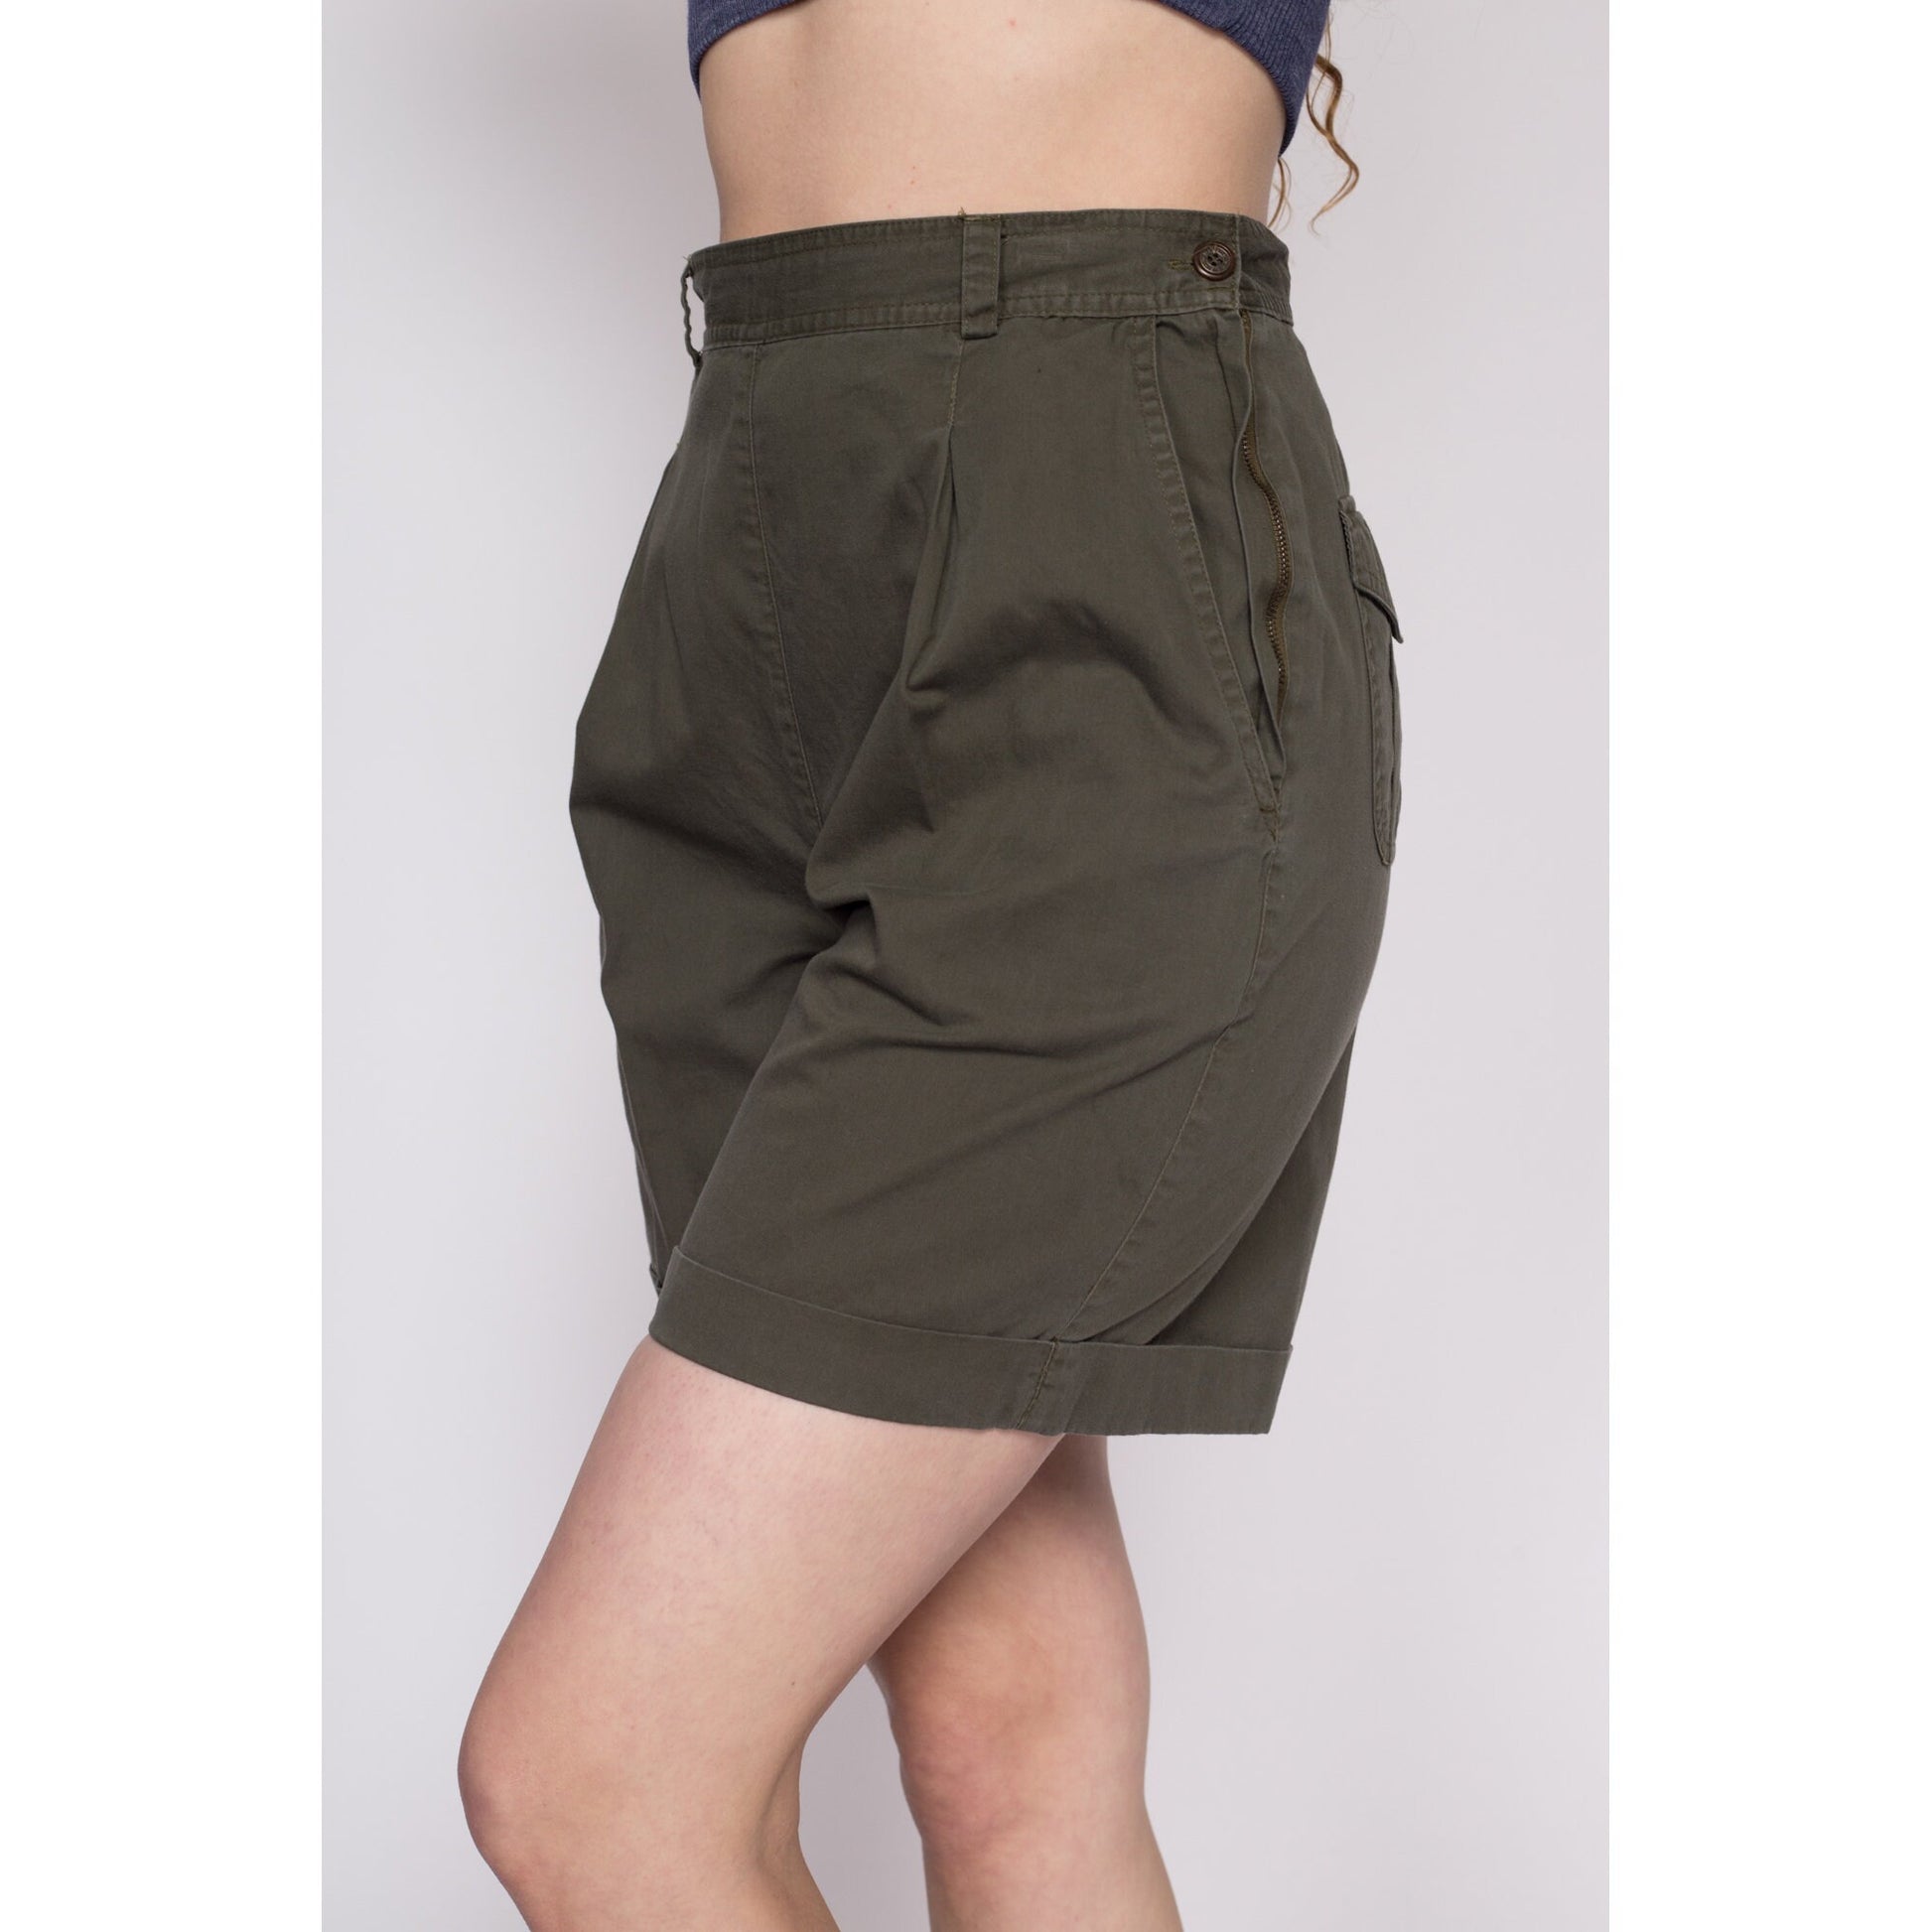 90s Olive High Waisted Pleated Shorts - Medium, 27.5" | Vintage White Stag Cuffed Mom Shorts